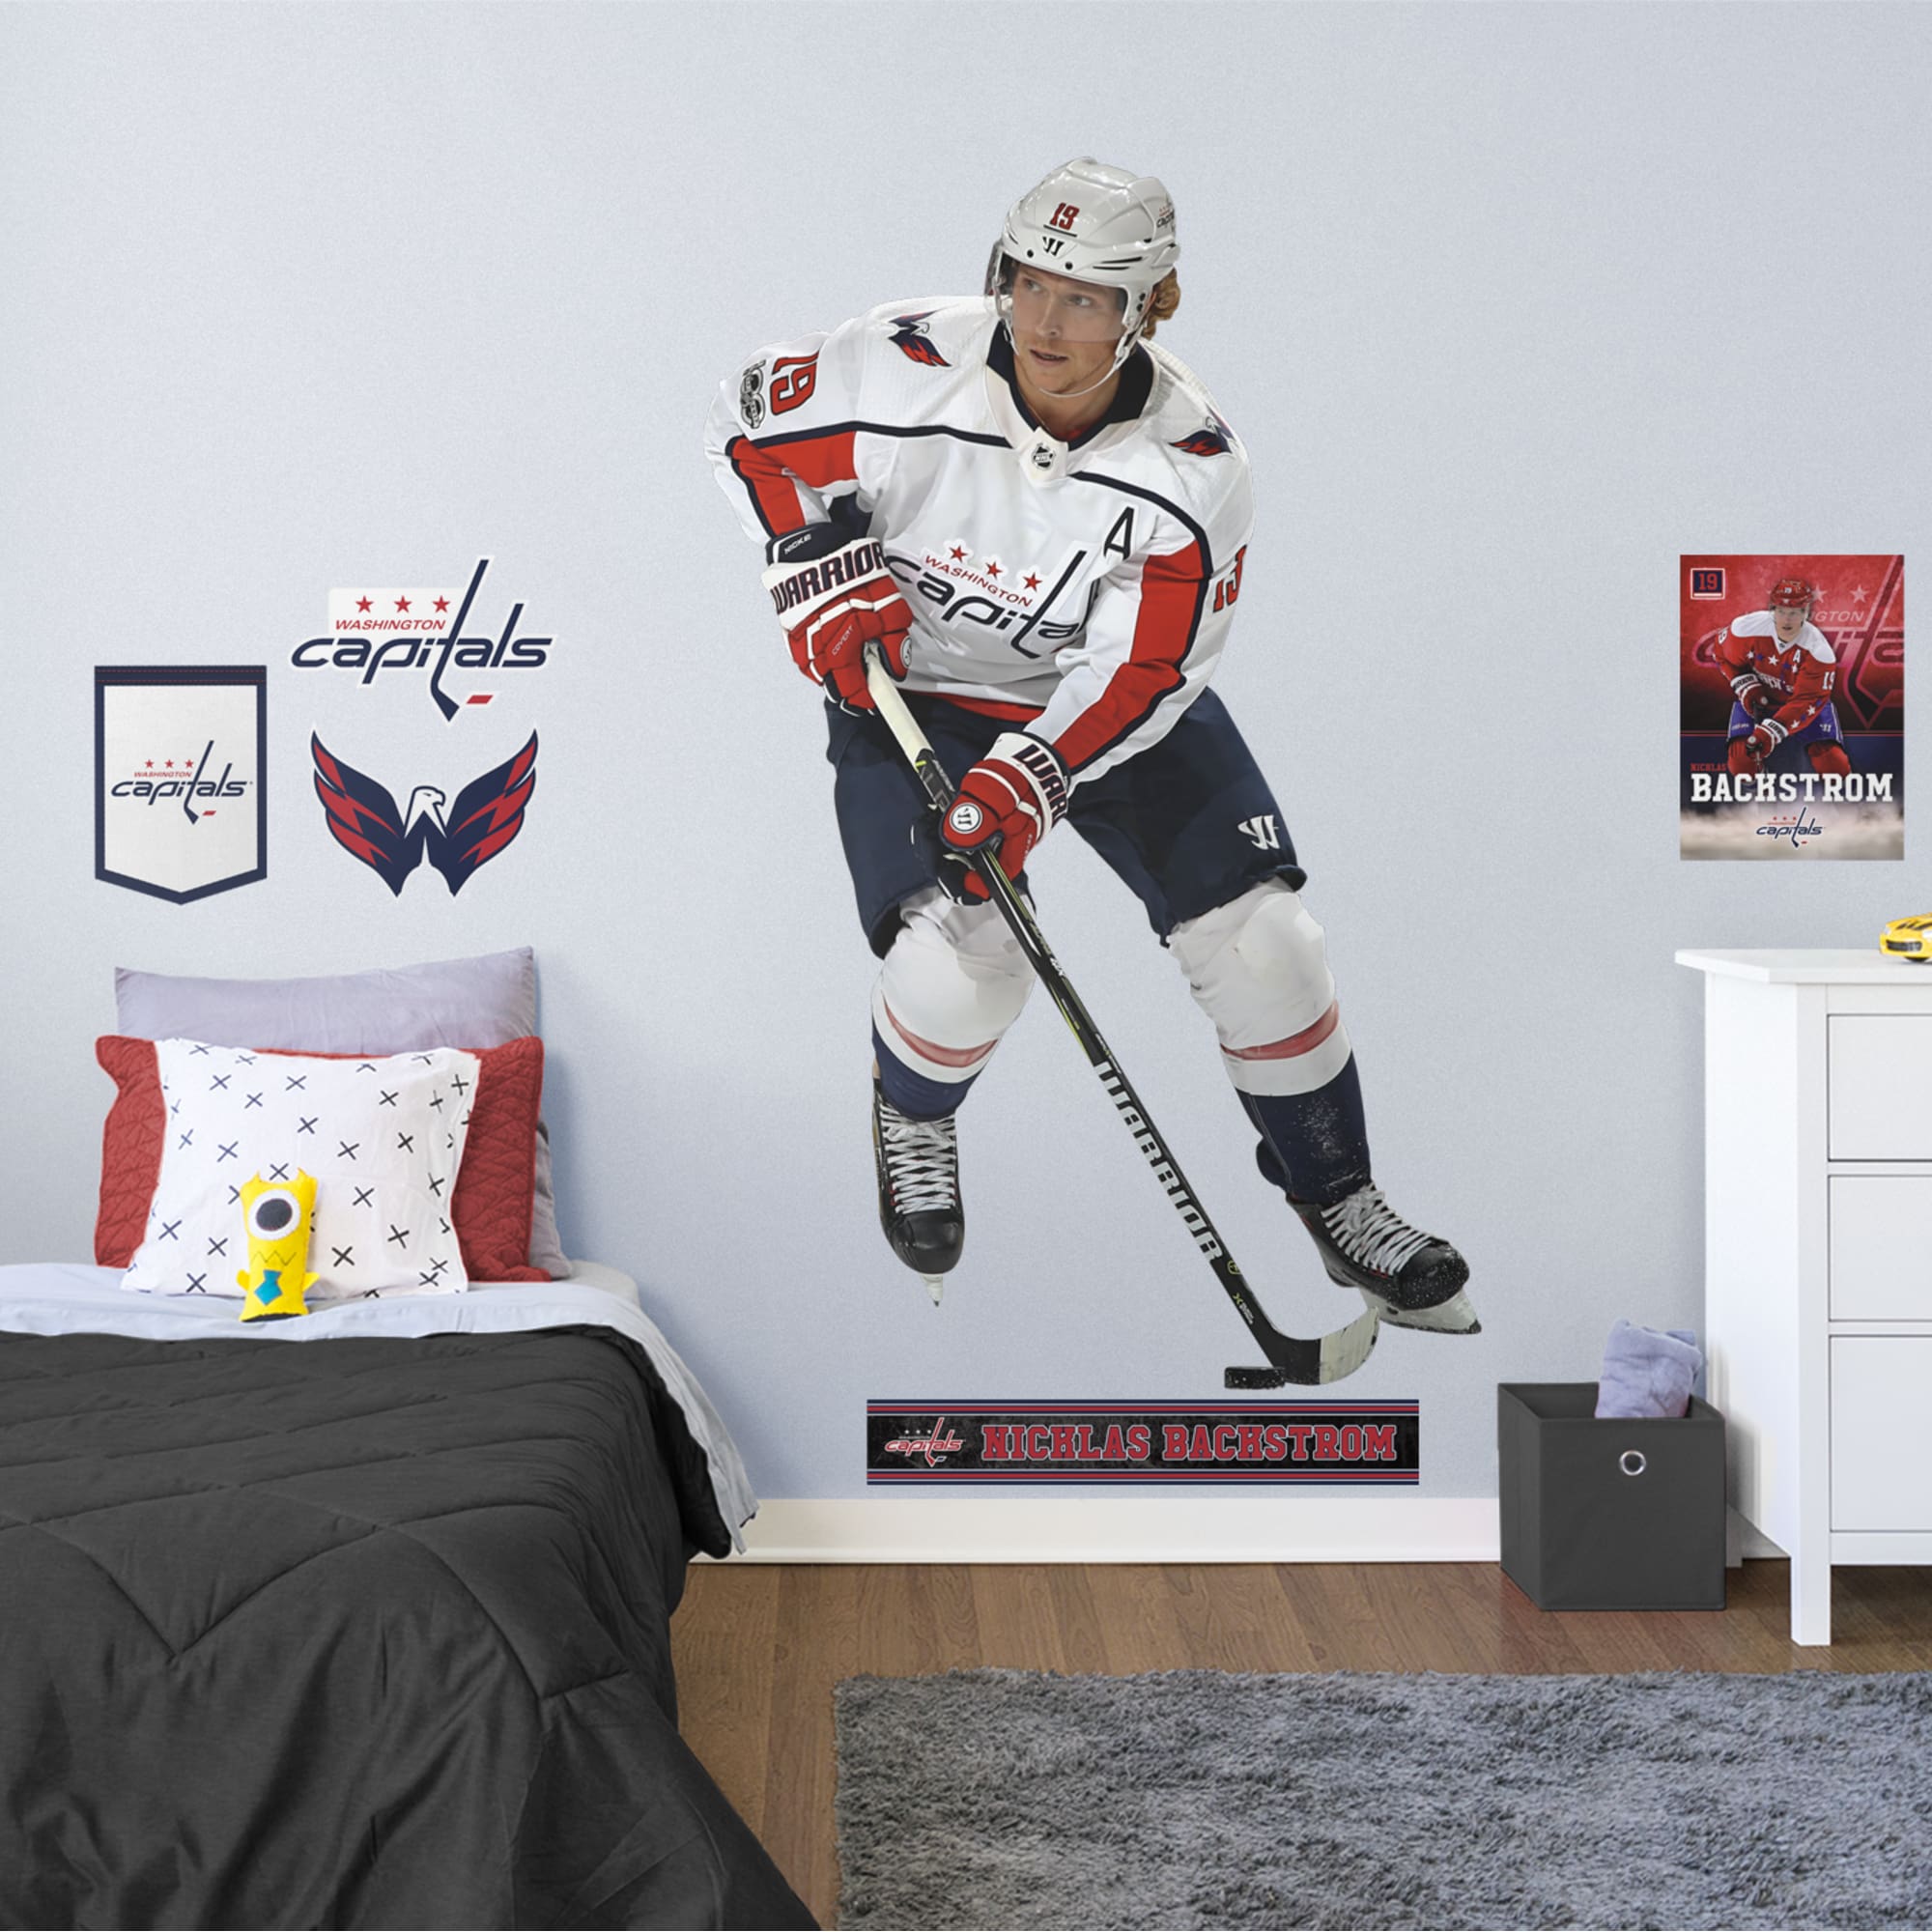 Nicklas Backstrom for Washington Capitals - Officially Licensed NHL Removable Wall Decal Life-Size Athlete + 9 Decals (48"W x 76